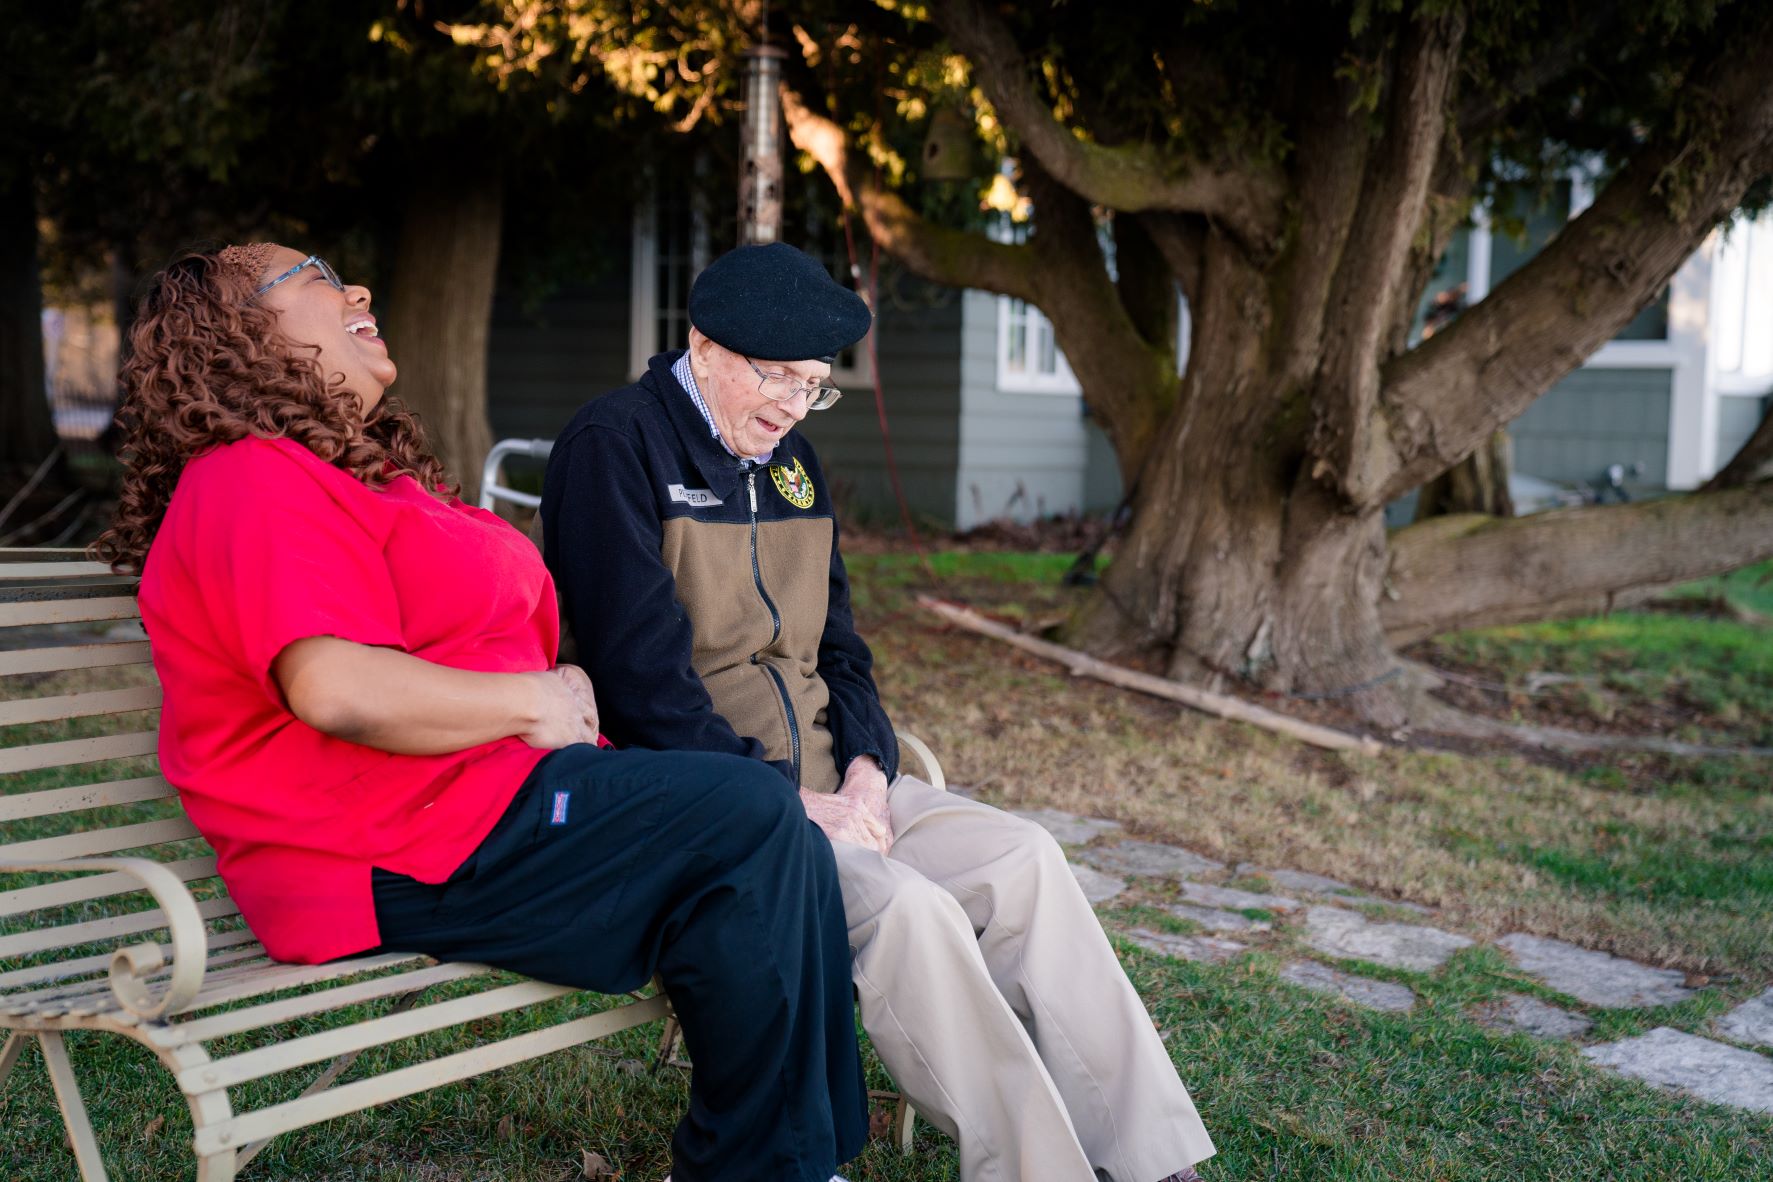 Caregiver sitting and laughing with senior